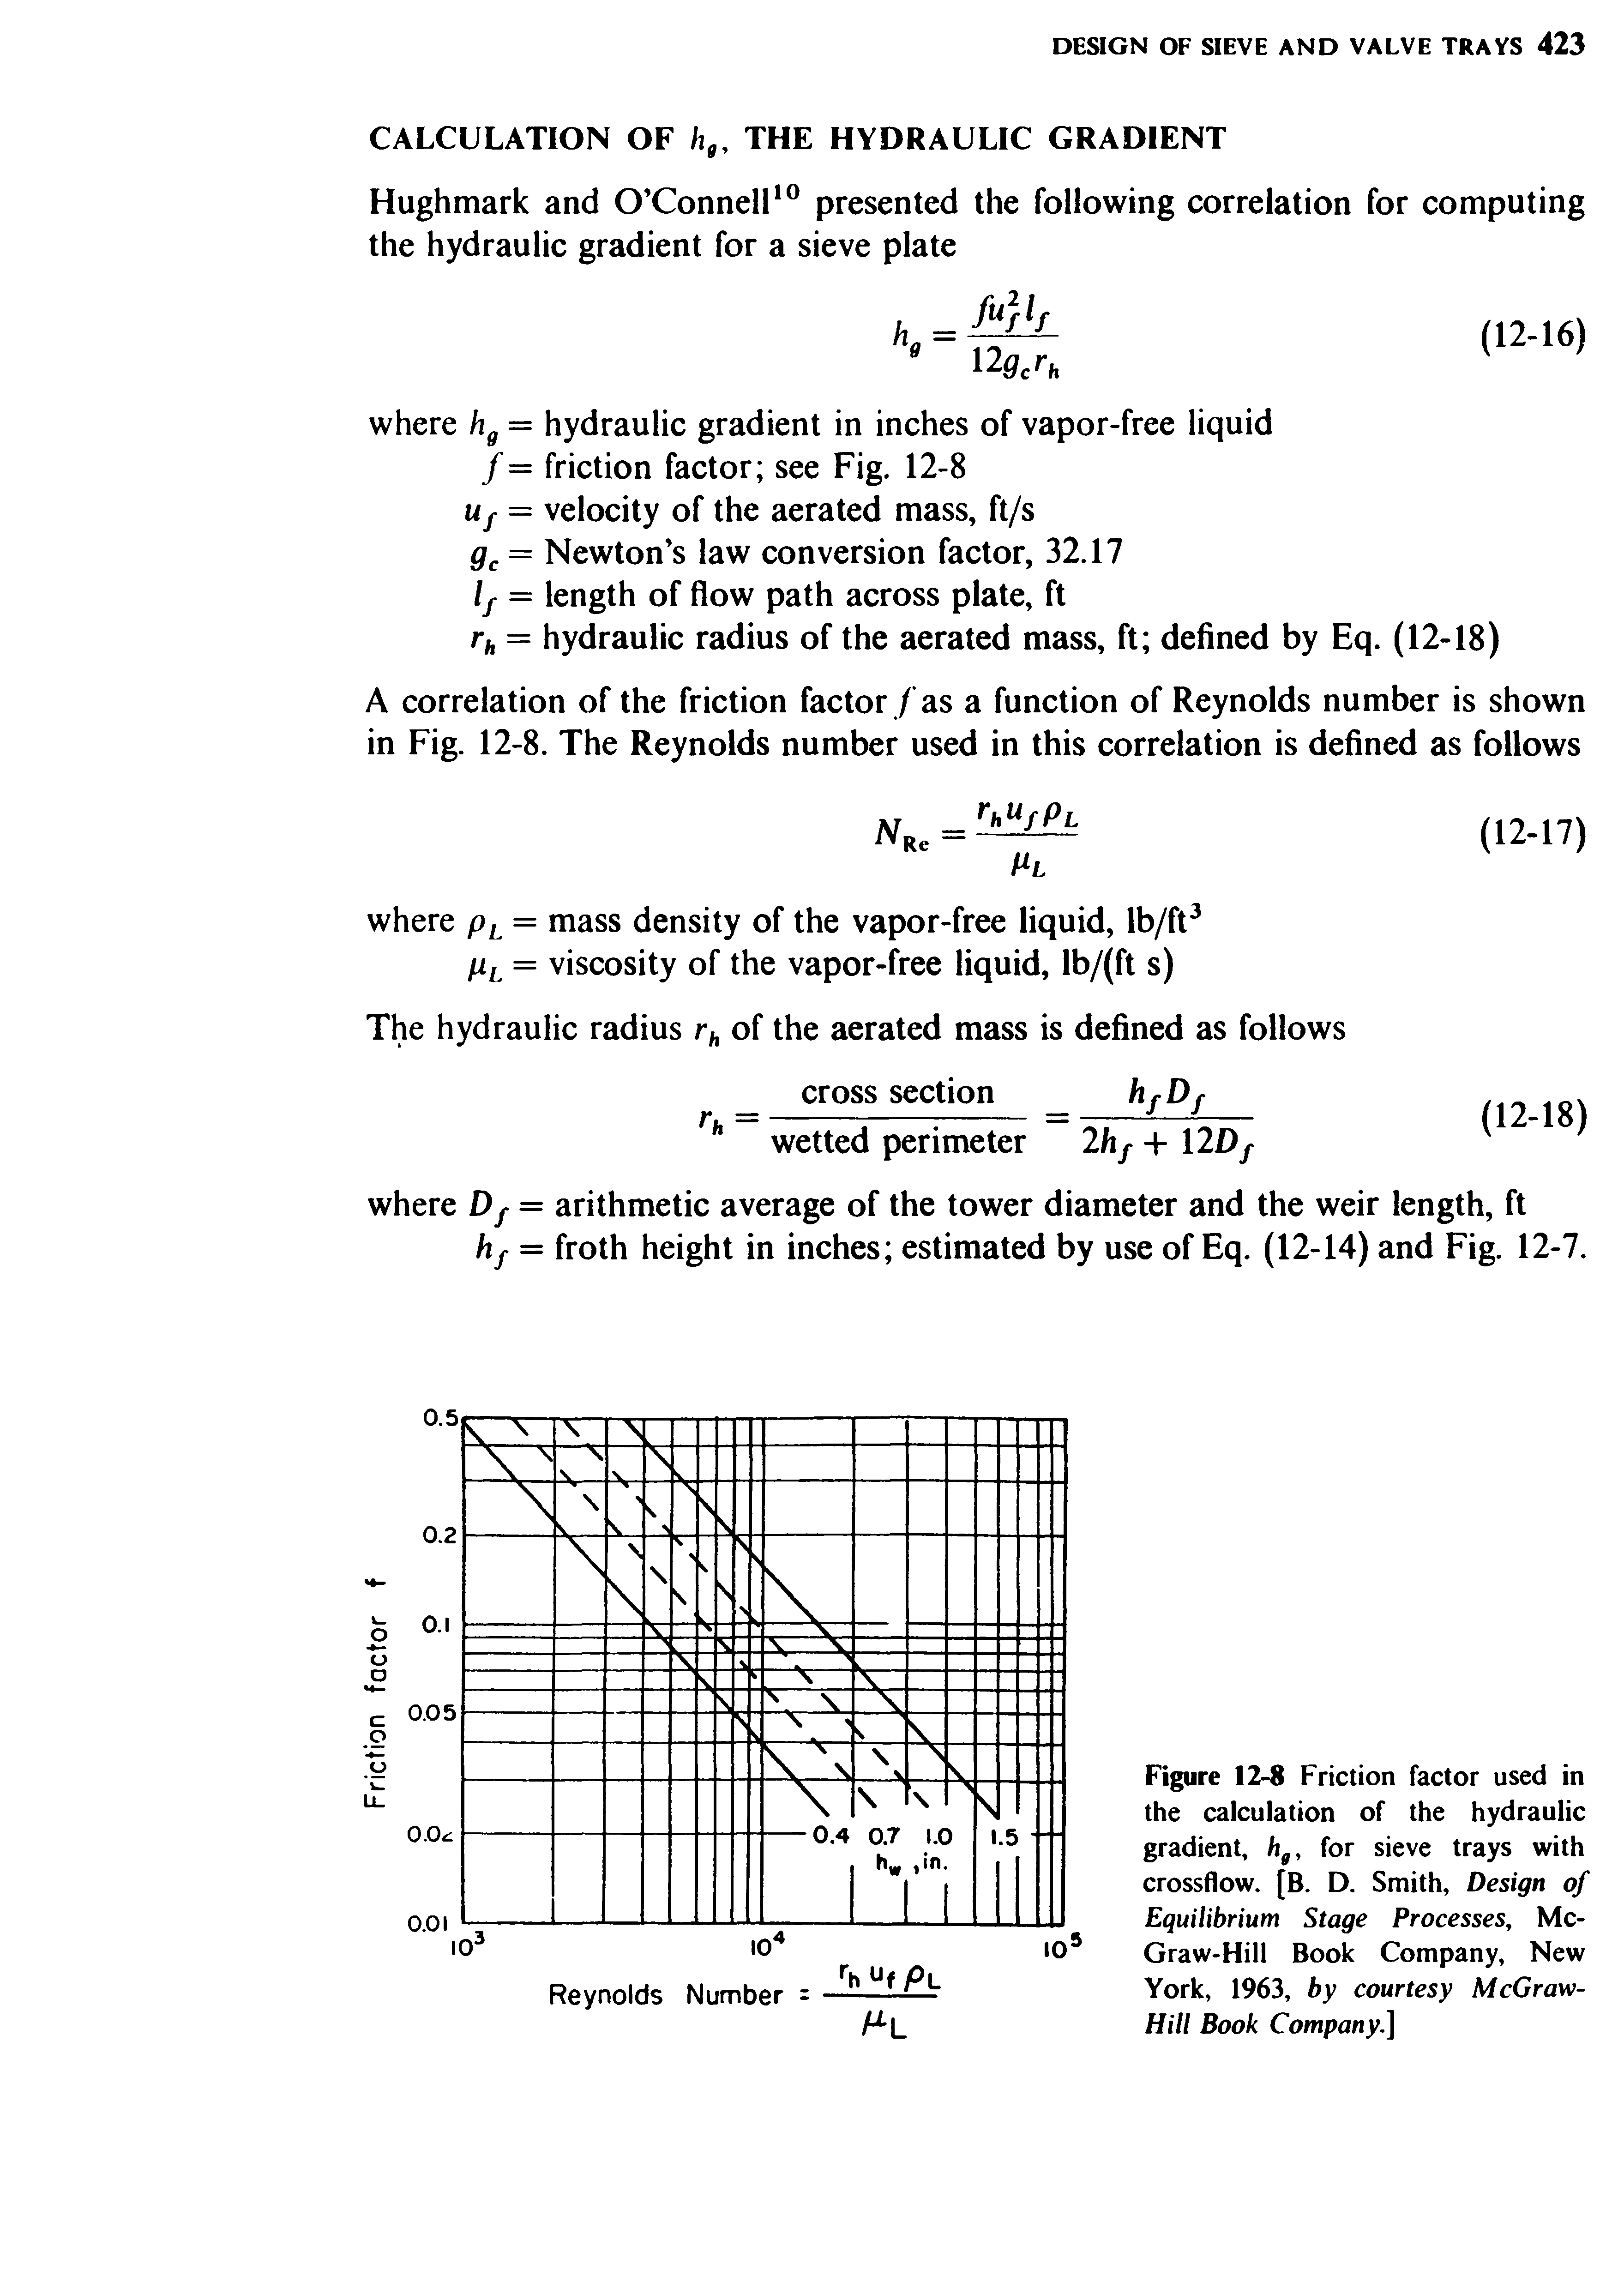 Figure 12-8 Friction factor used in the calculation of the hydraulic gradient, hg, for sieve trays with crossflow. [B. D. Smith, Design of Equilibrium Stage Processes, McGraw-Hill Book Company, New York, 1963, by courtesy McGraw-Hill Book Company.]...